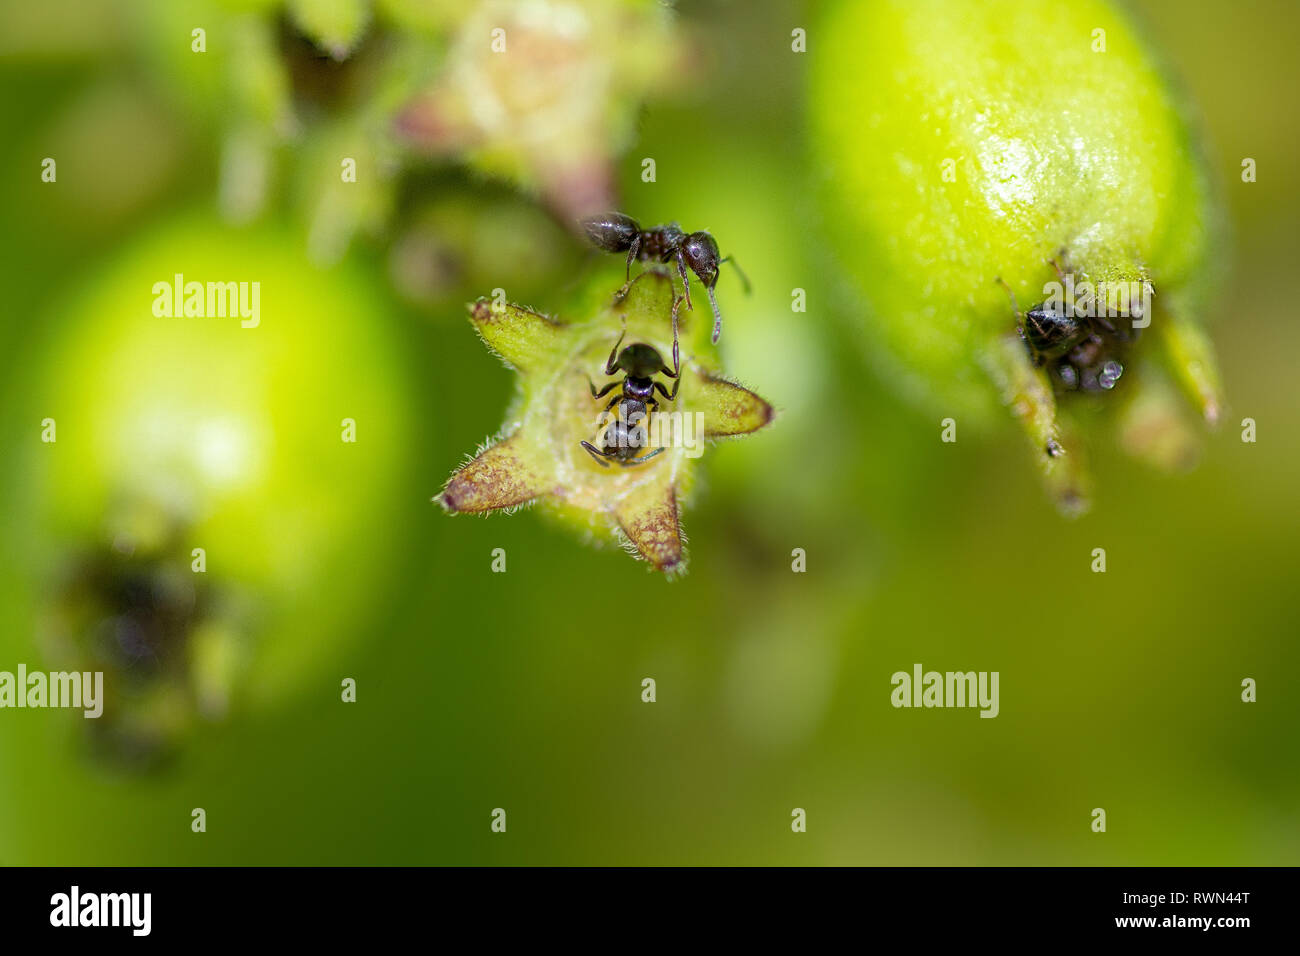 A colony of black worker ants on top of bright green plant buds in macro detail. Stock Photo